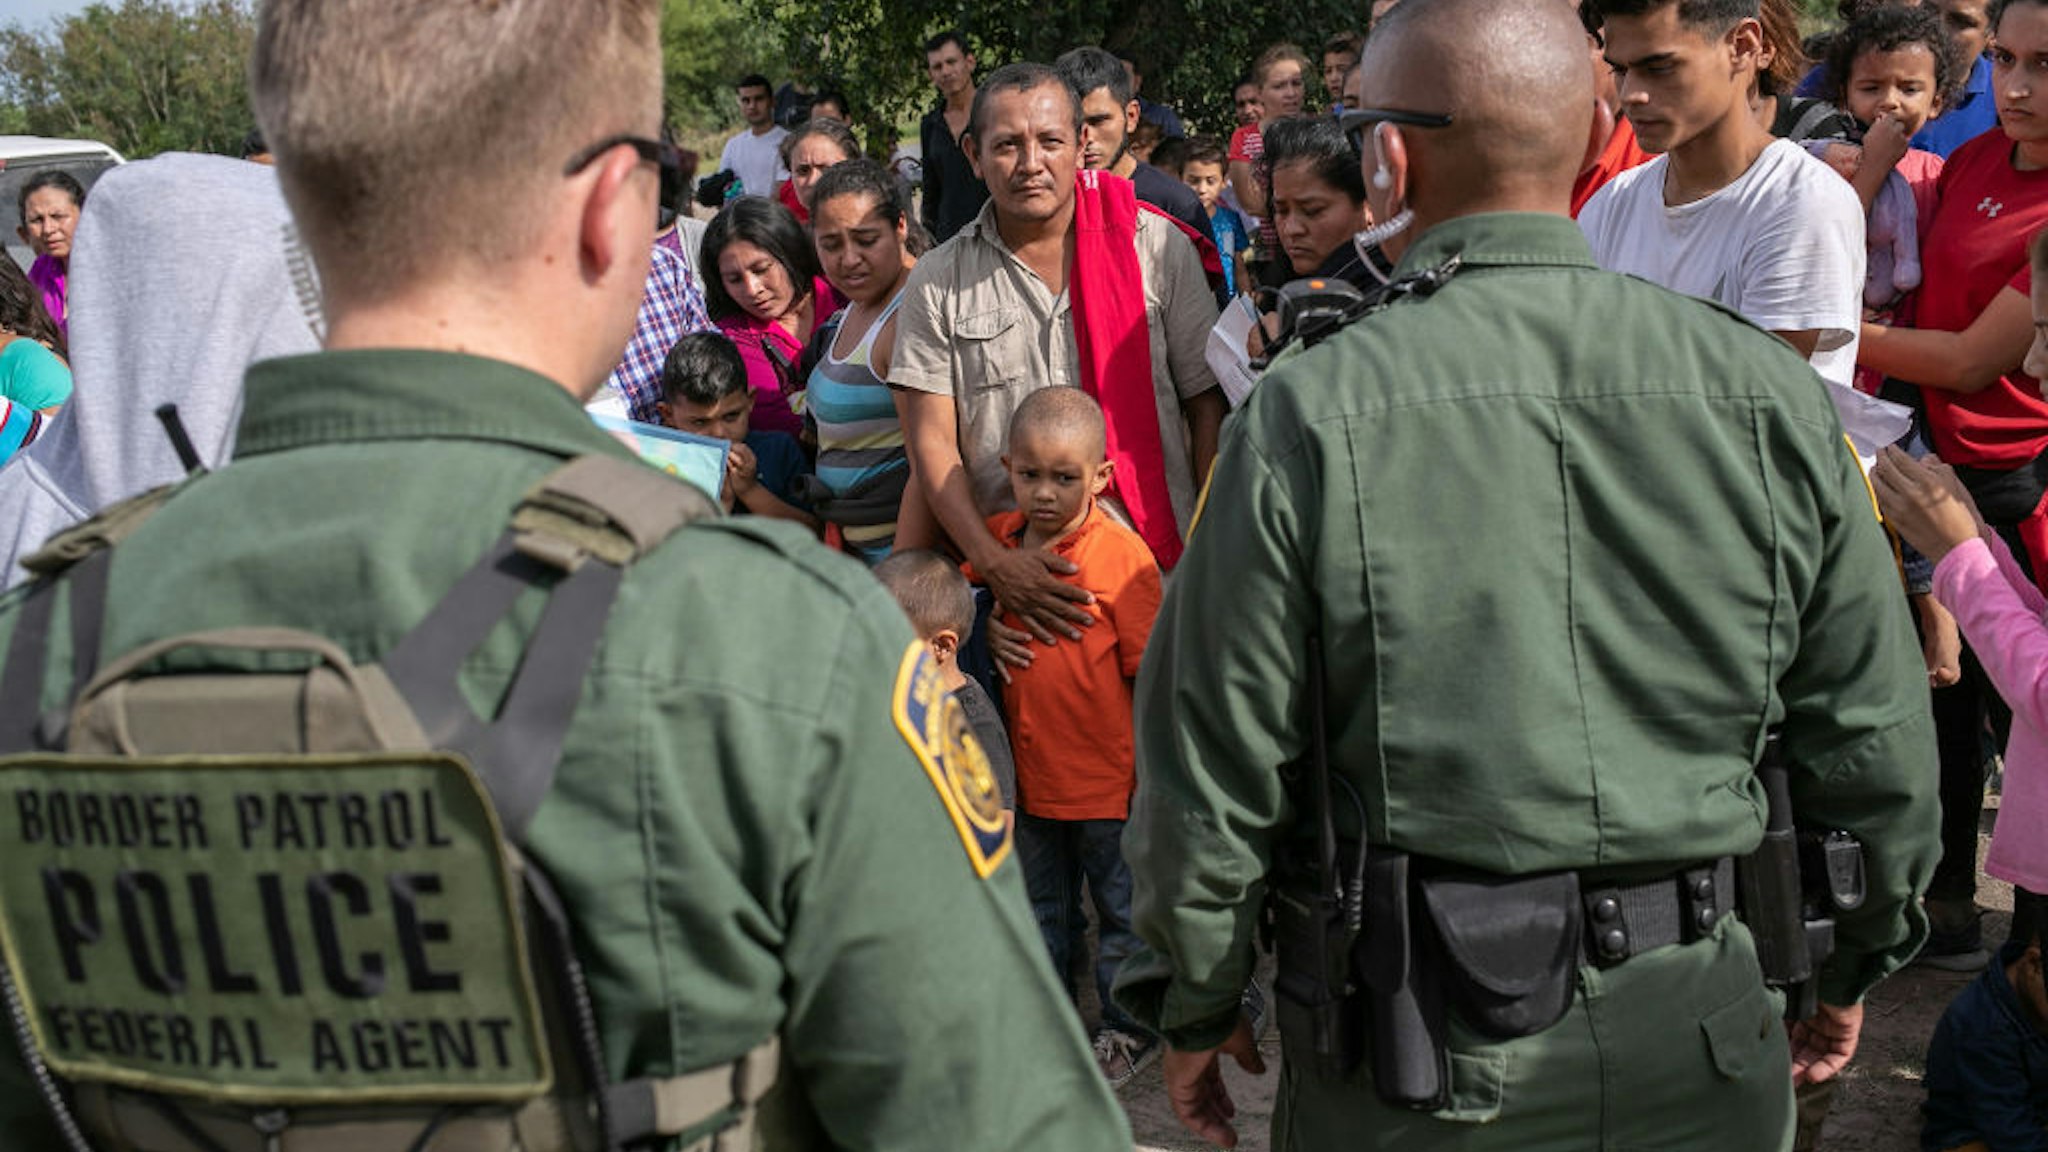 U.S. Border Patrol agents watch over immigrants after taking them into custody on July 02, 2019 in Los Ebanos, Texas.